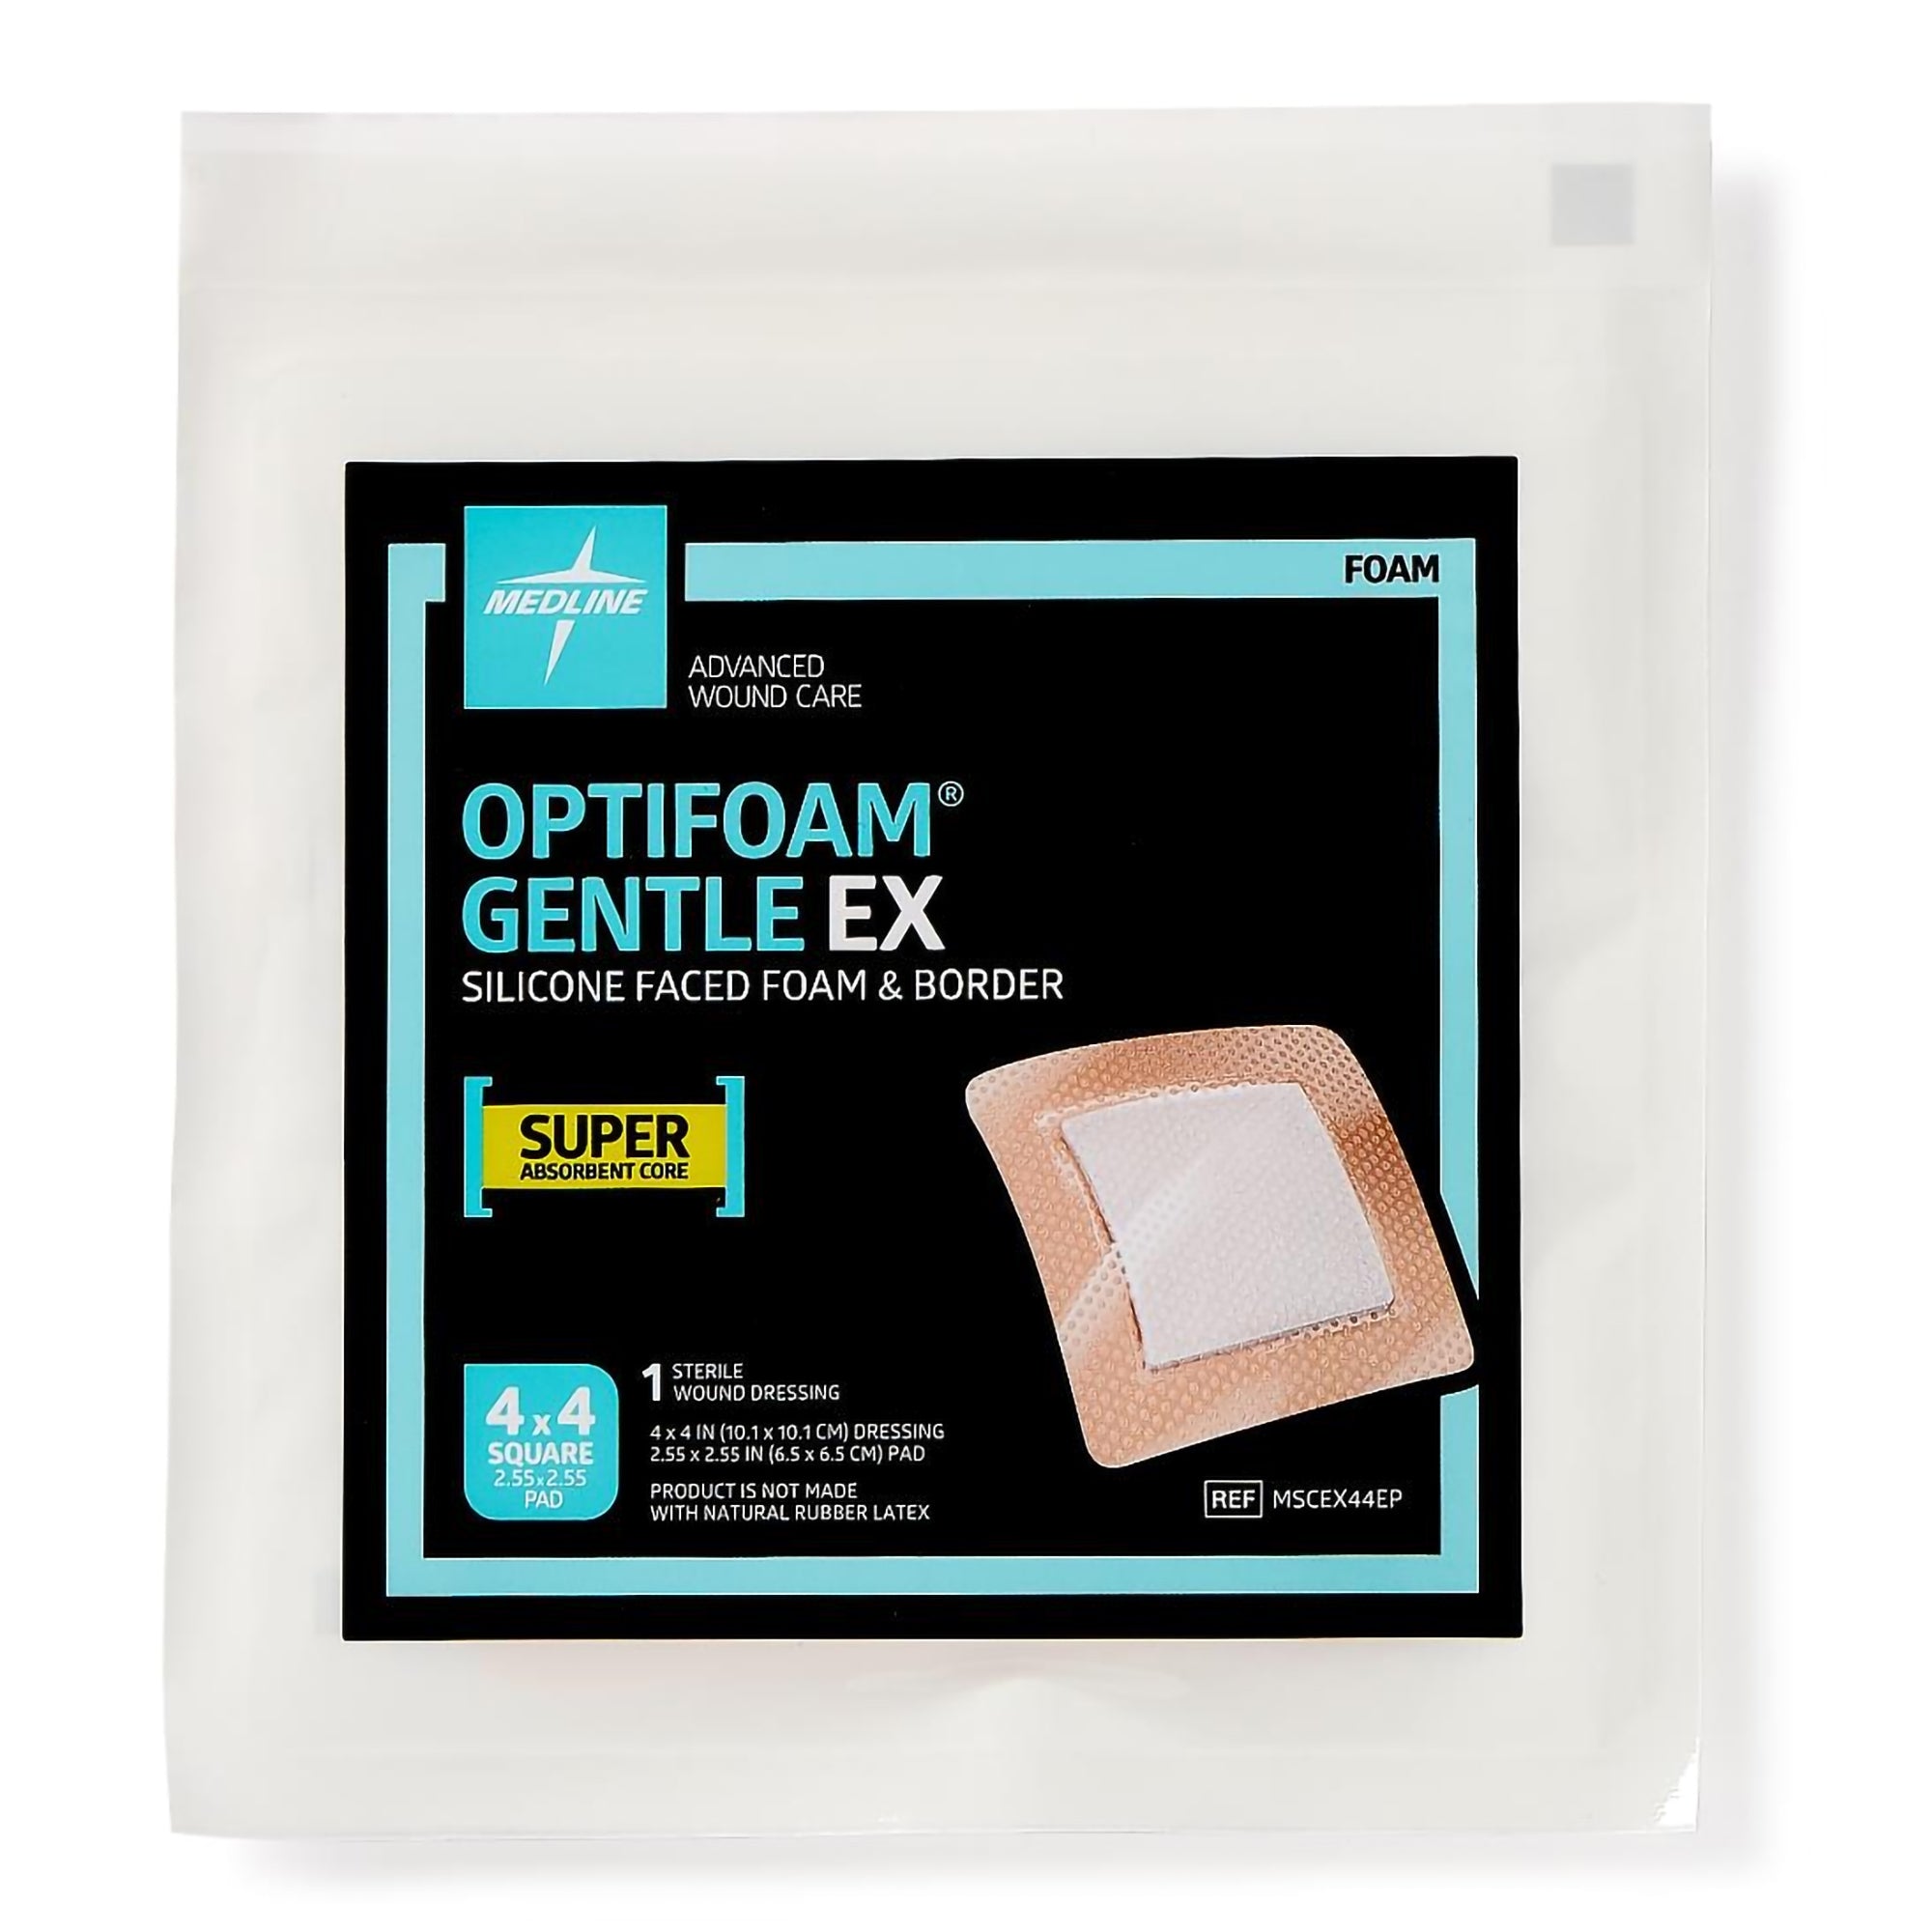 Medline Optifoam® Gentle EX Foam Dressing with Border - 4 x 4 Inch, Silicone Face and Border, Sterile